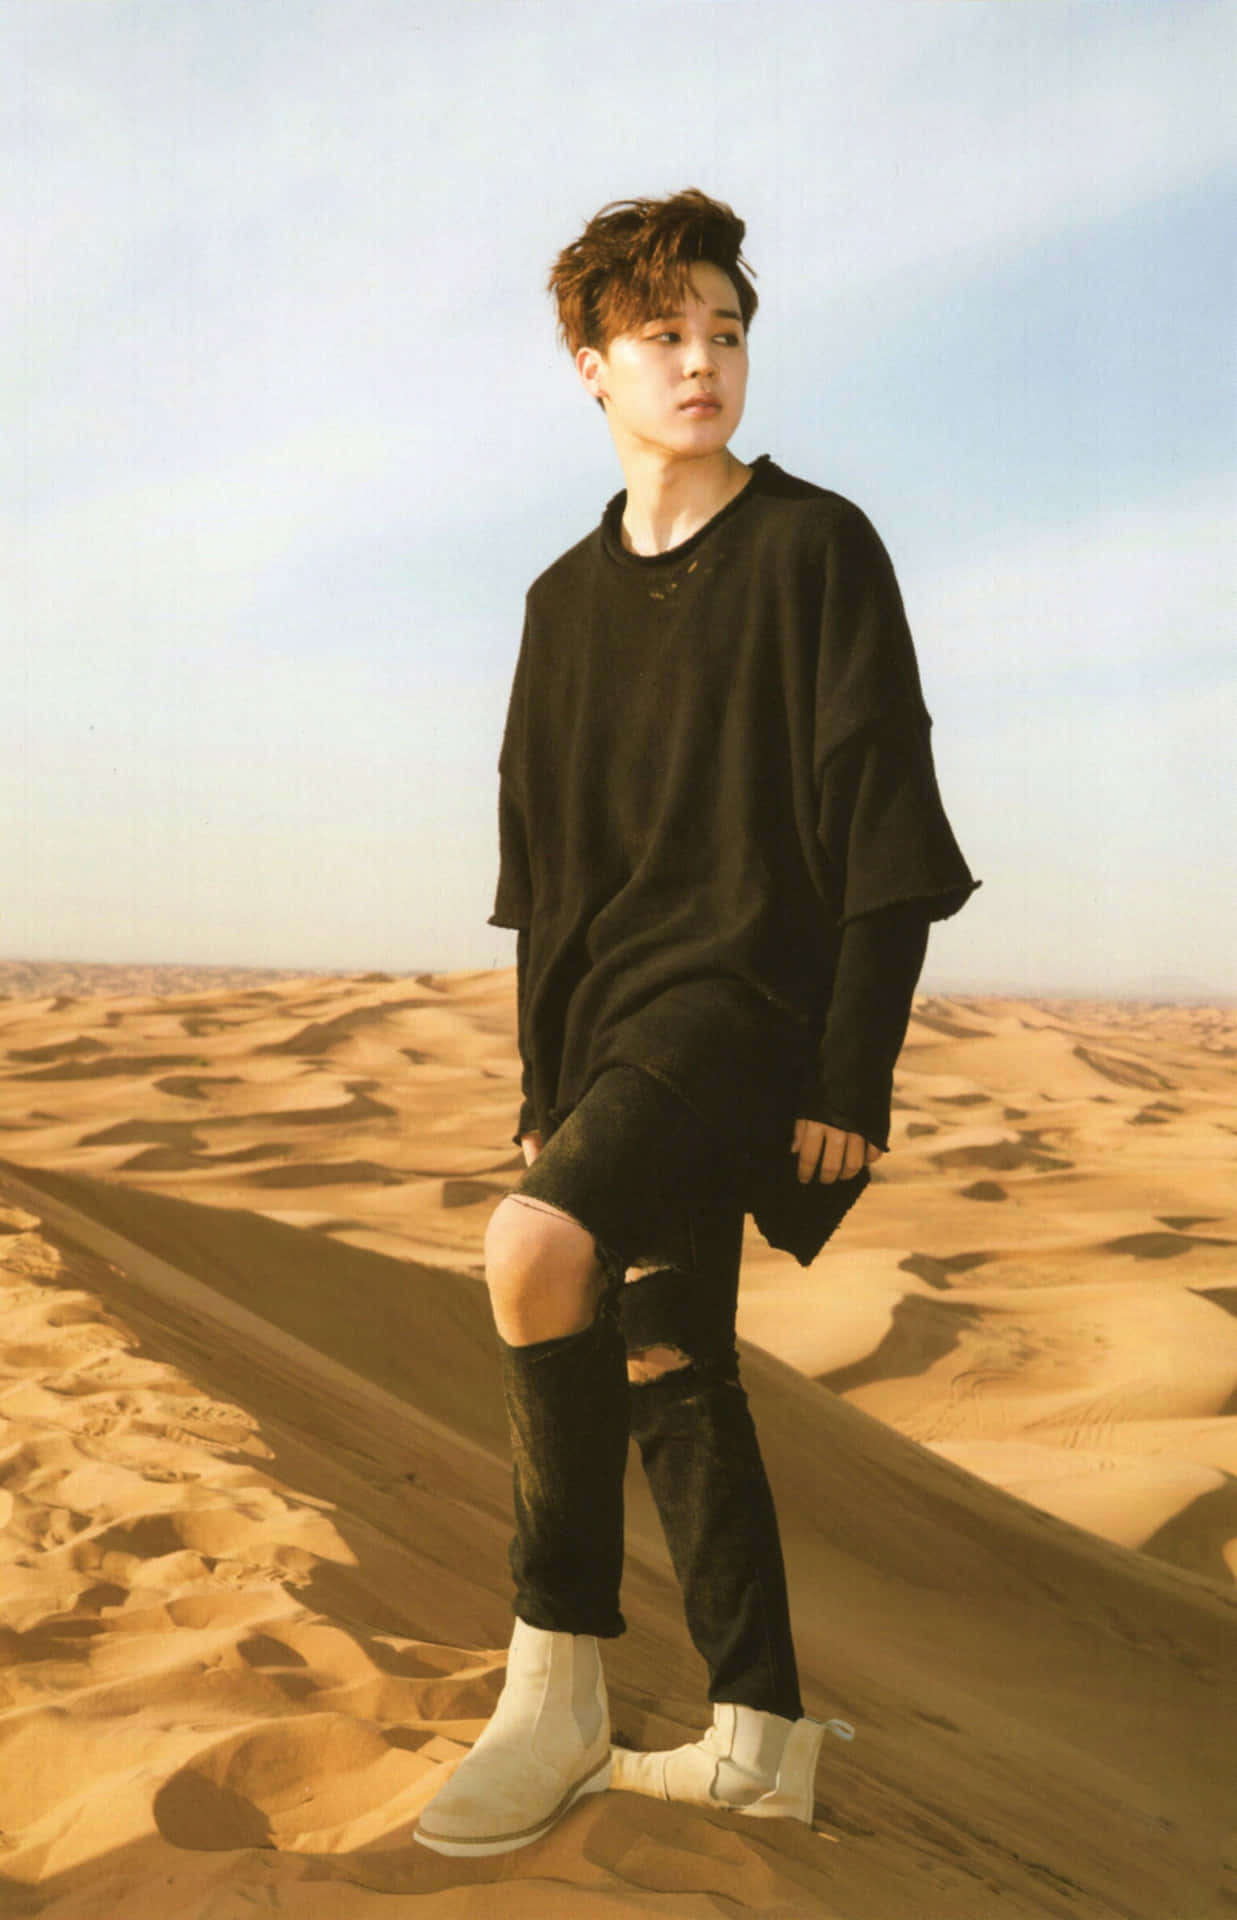 Photoshoot Of Jimin In A Desert Background